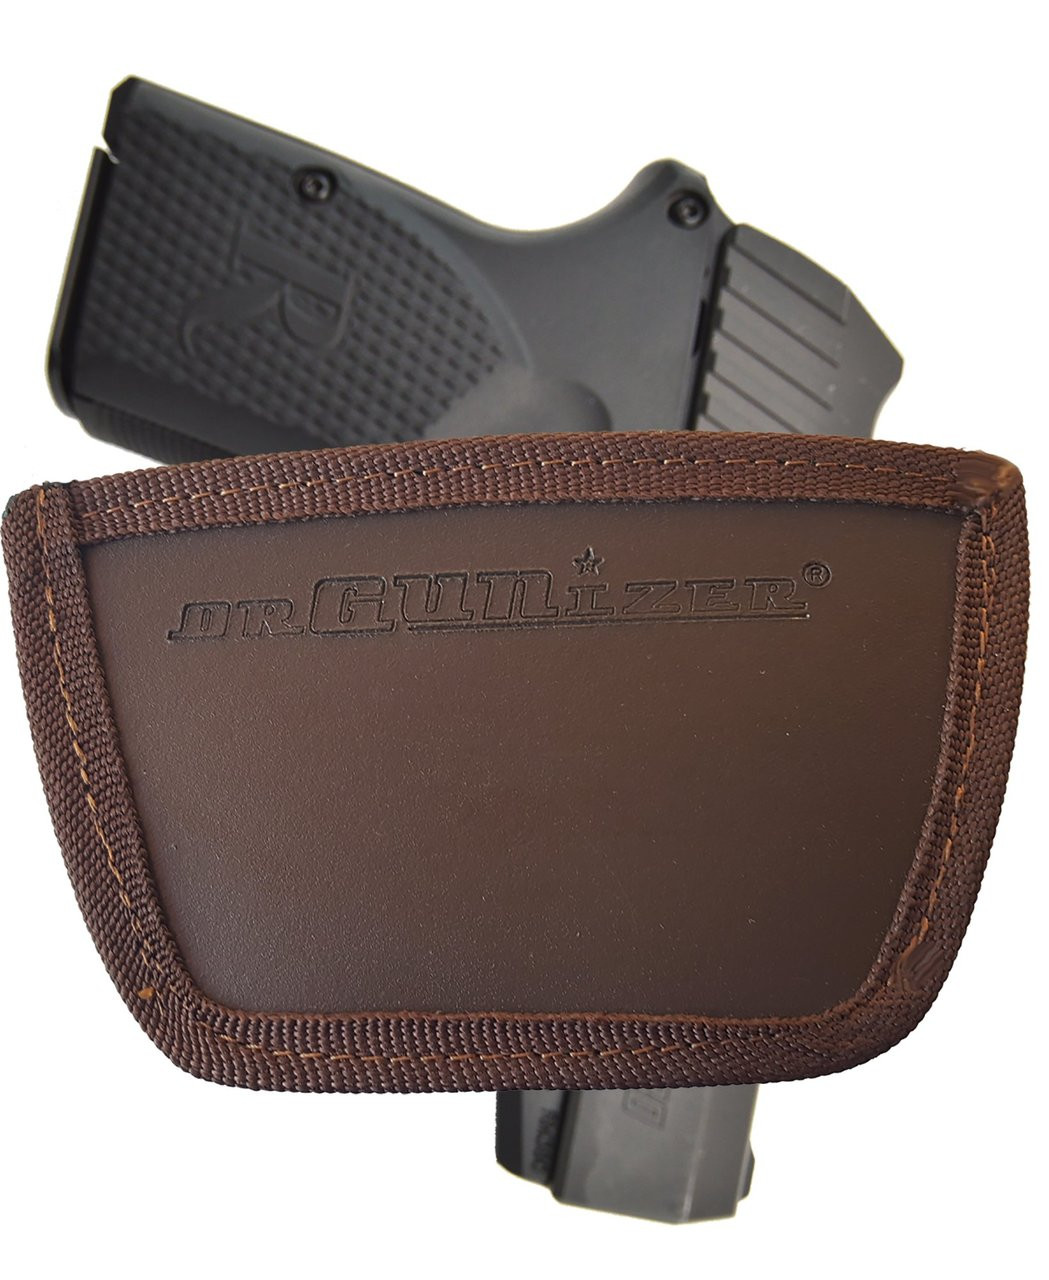 Garrison Grip Leather Inside and Outside Waistband Easy Slide Holster Fits Remington 380 Brown